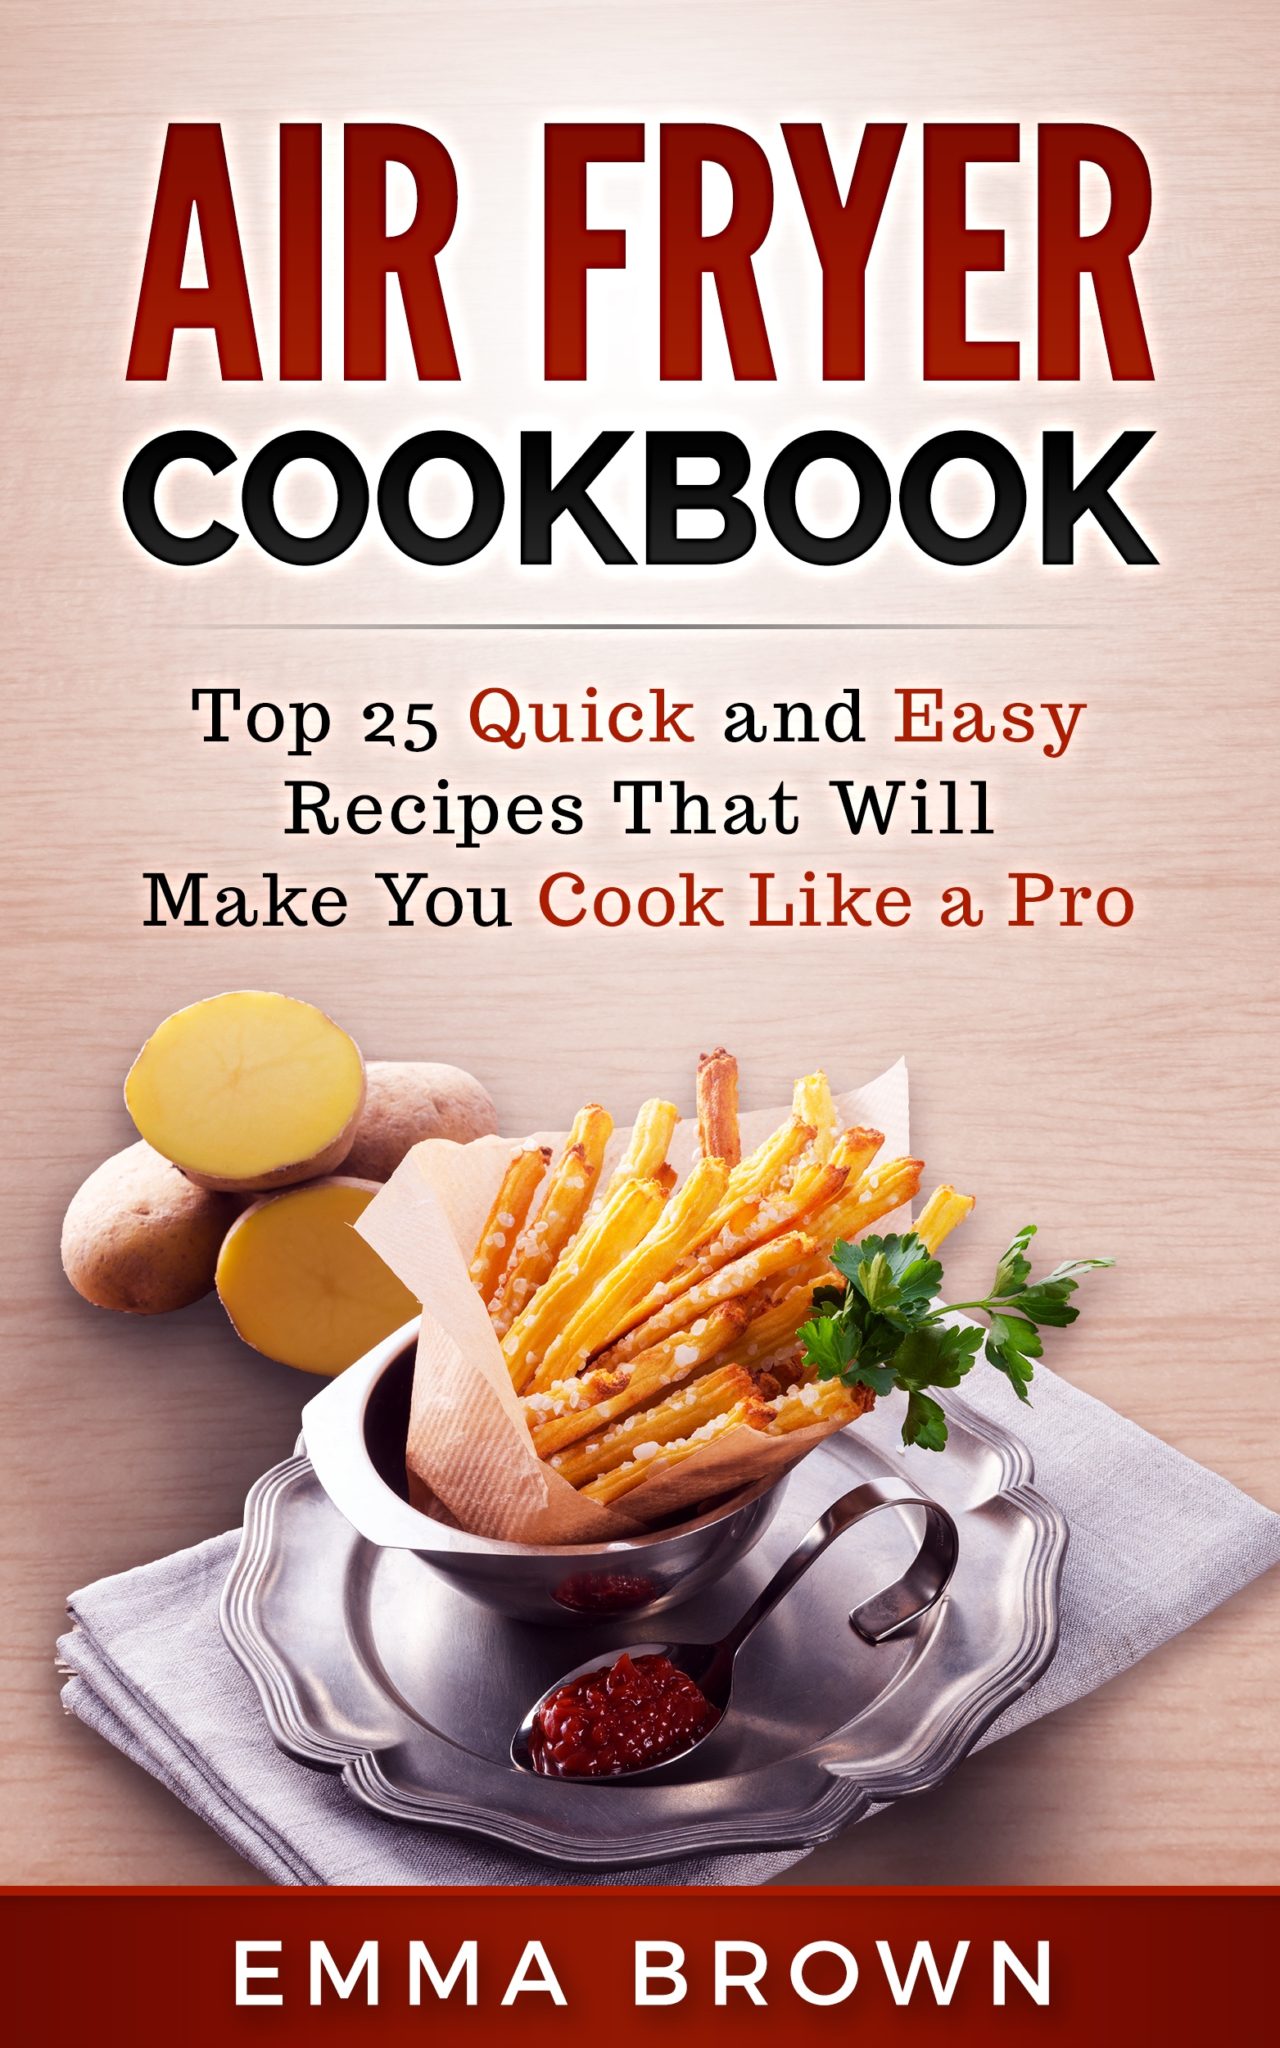 FREE: Air Fryer Cookbook: Top 25 Quick and Easy Recipes That Will Make You Cook Like a Pro by Emma Brown